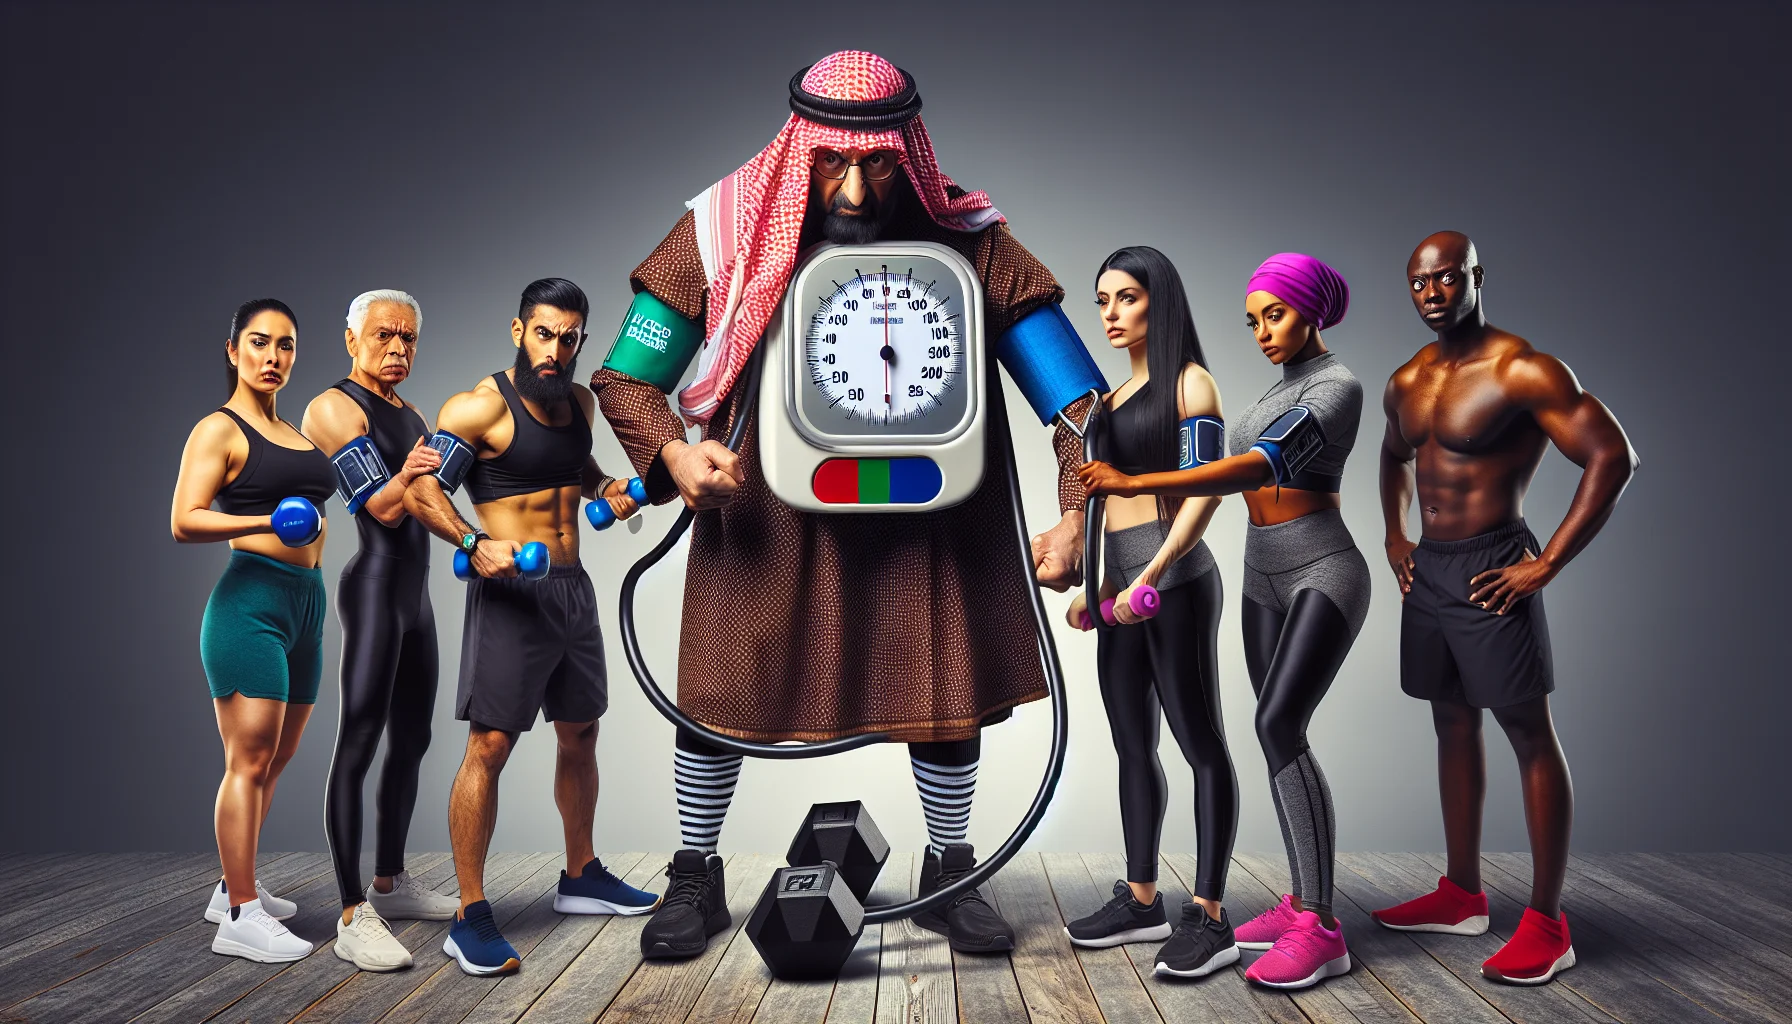 Create a humorous, realistic image that symbolizes high blood pressure as a silent threat in the world of fitness. The main scene could feature a large, intimidating blood pressure monitor dressed in workout gear, trying to strike fear into a diverse group of people also in their gym attire. They could include a Middle-Eastern woman, a Hispanic man, a South Asian man, and a Black woman, who instead see the funny side and are more motivated to exercise, showcasing dumbbells, skipping ropes, or running shoes ready to workout.